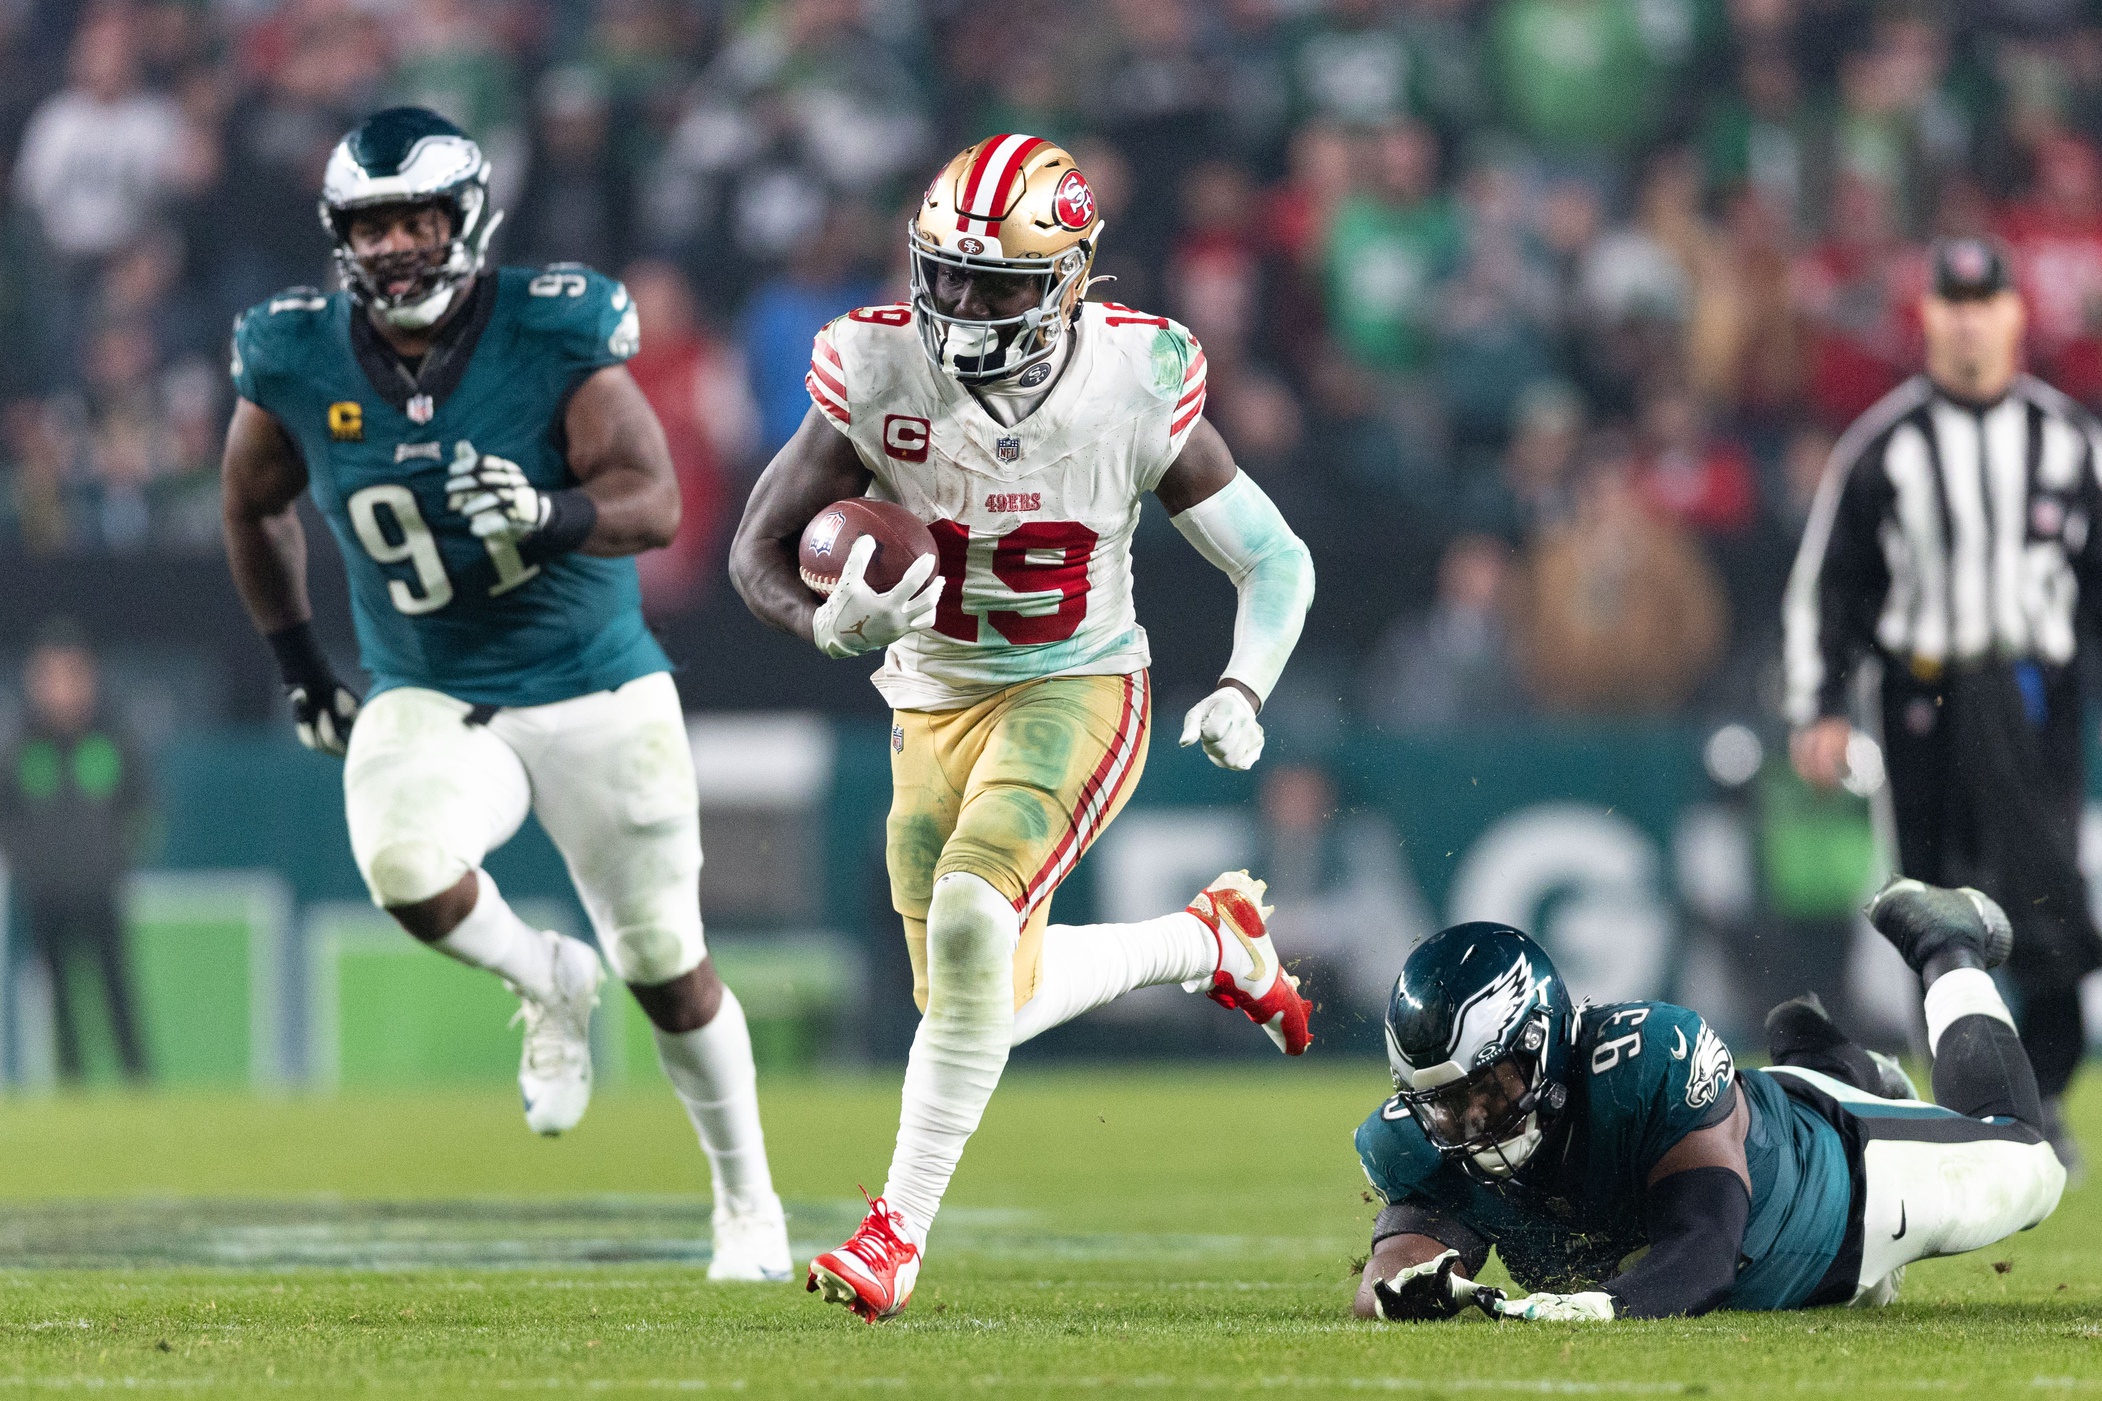 Niners receiver Deebo Samuel was unstoppable against the Eagles, scoring three touchdowns in the NFL title game rematch in Week 13.